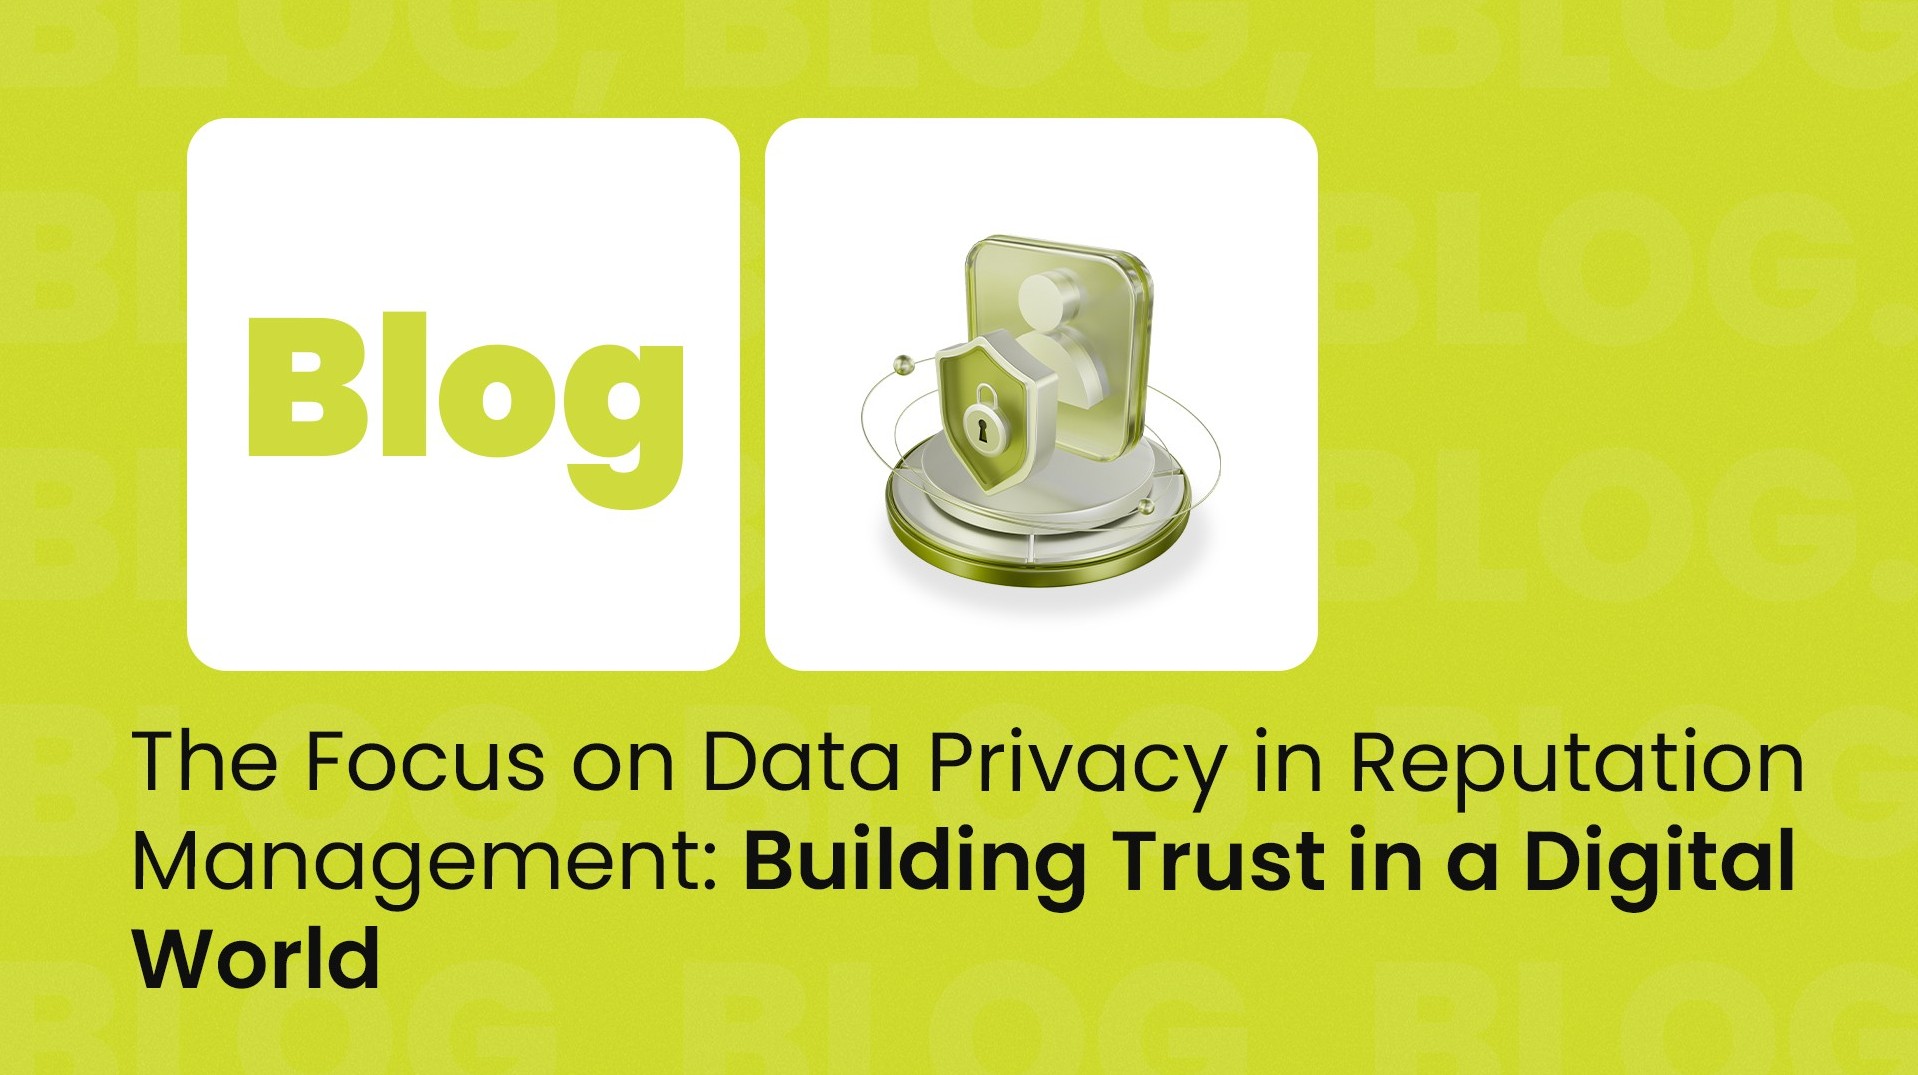 The Focus on Data Privacy in Reputation Management: Building Trust in a Digital World